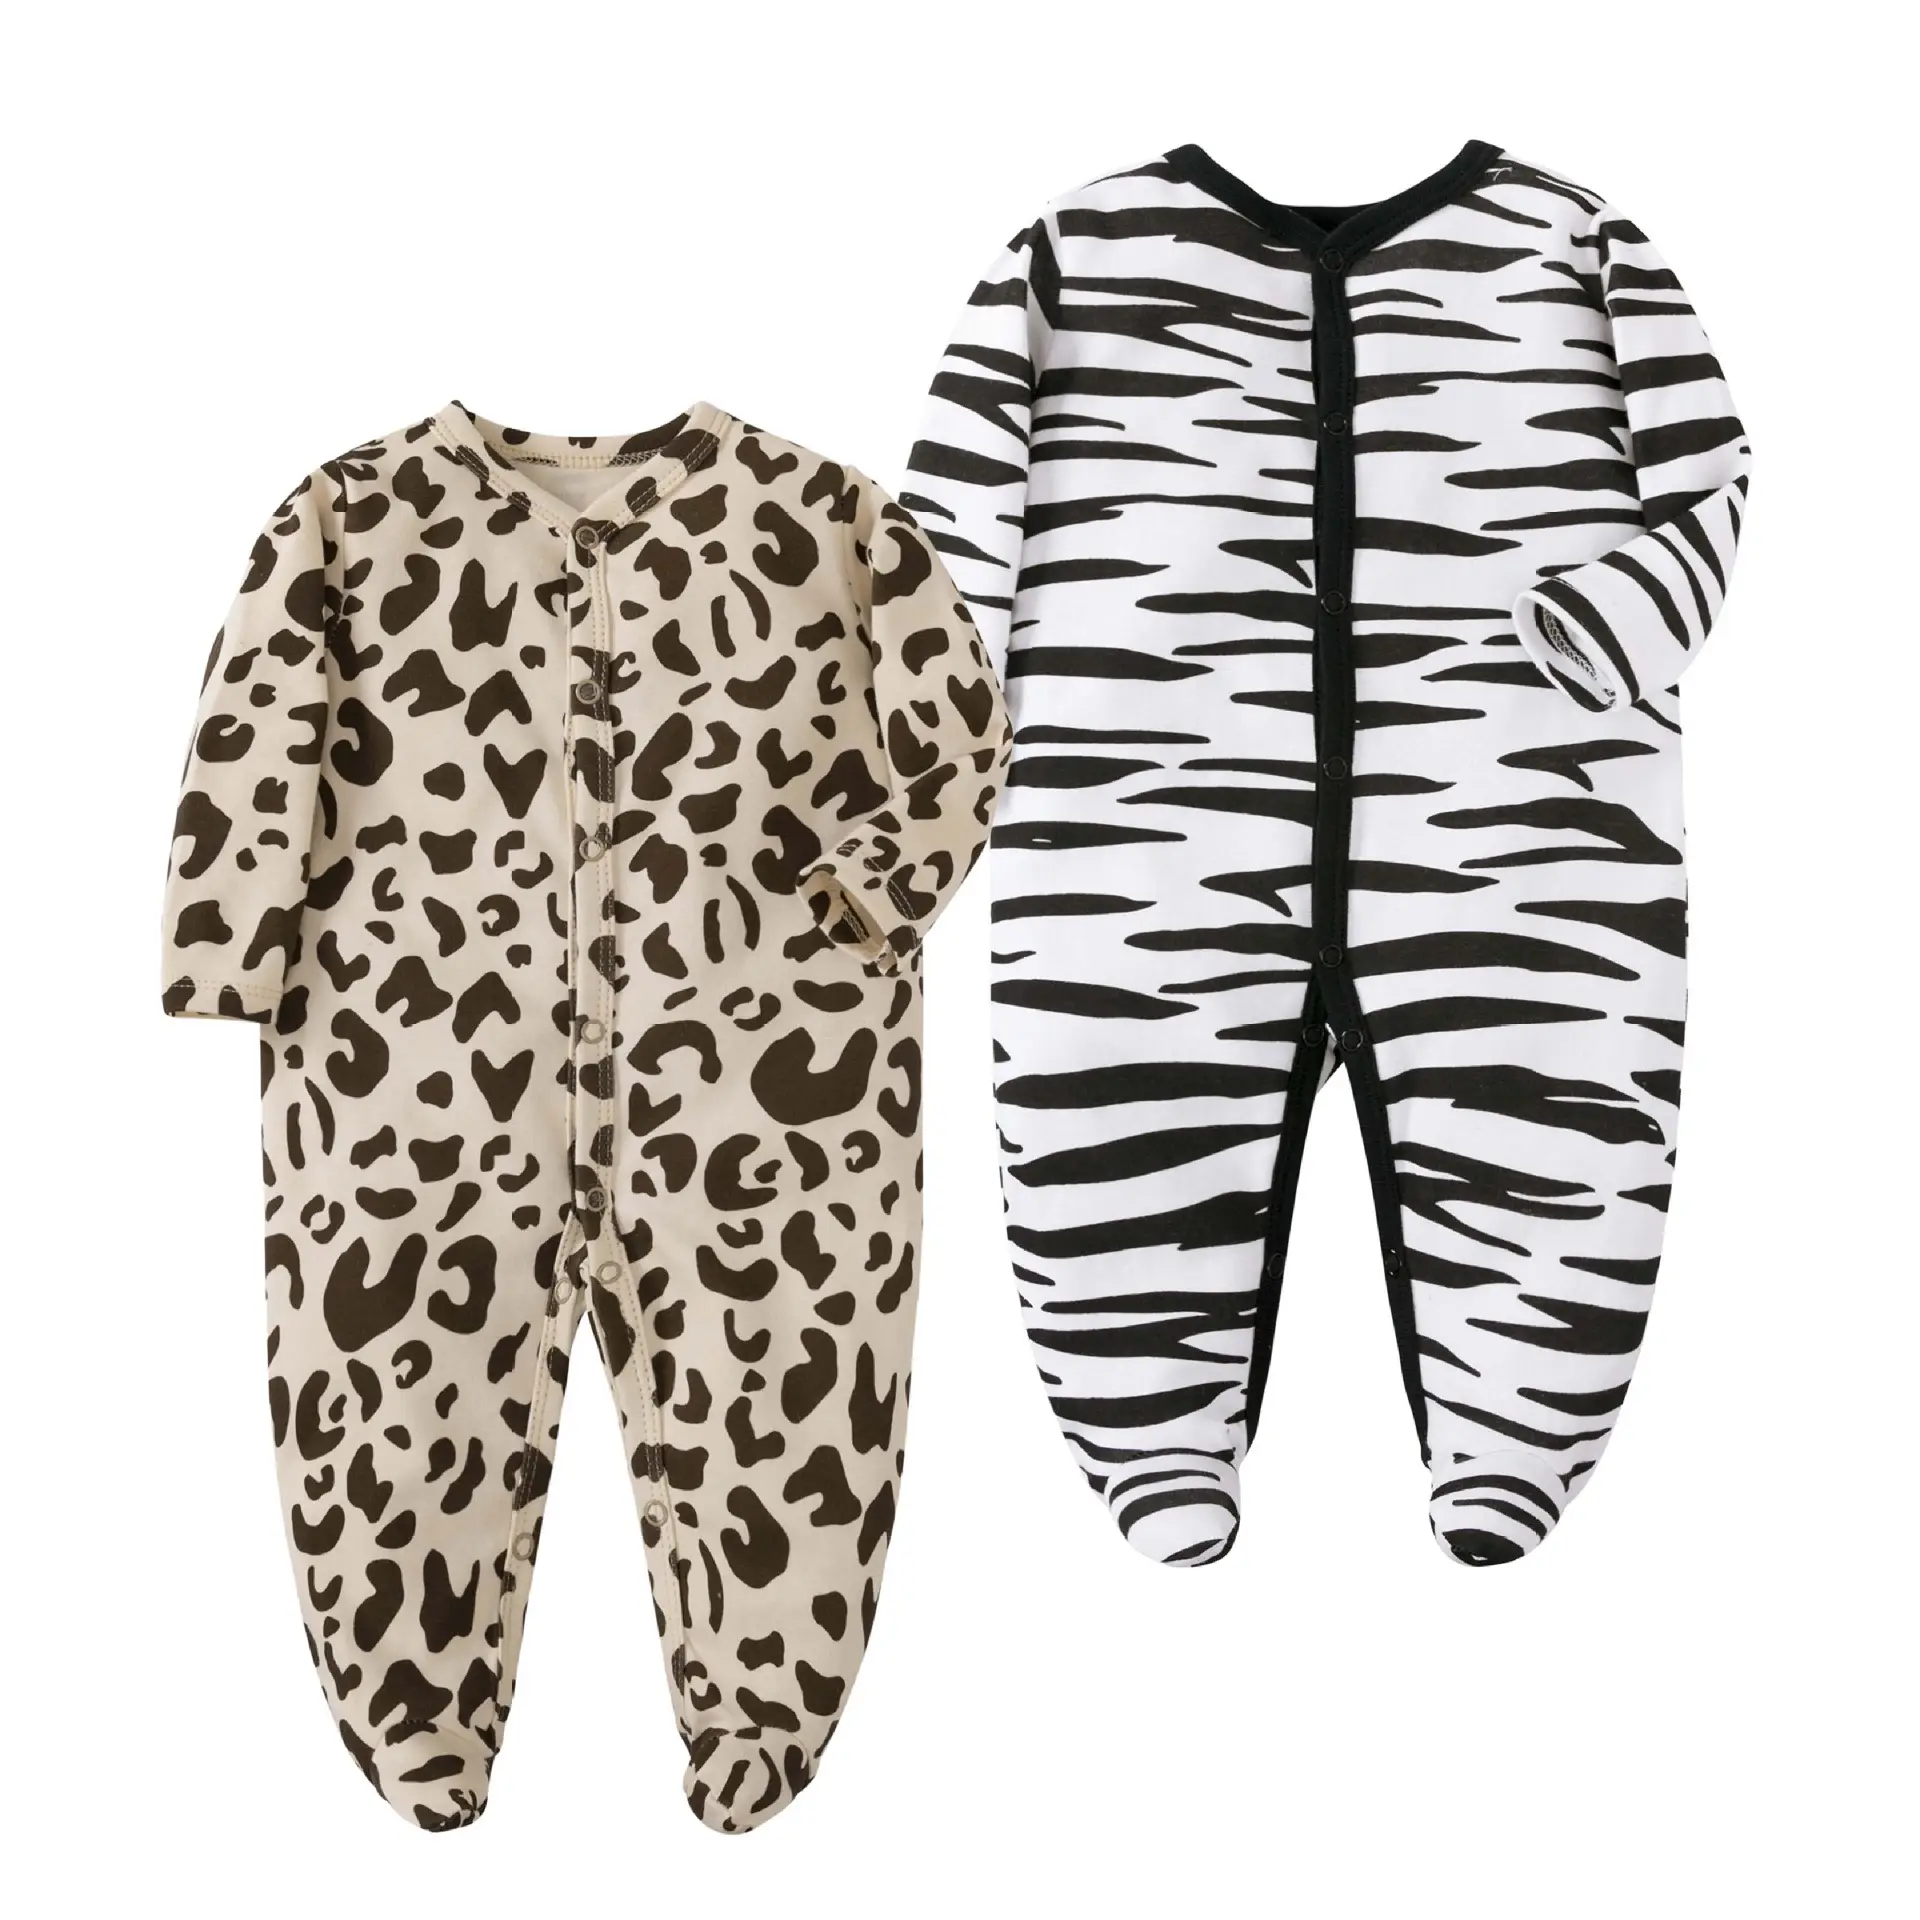 Sleepwear for Newborn Boys and Girls Romper Long Sleeved Cute Print Cotton Fashion Pajamas 0-12 Months Sleepsuit Baby Clothing